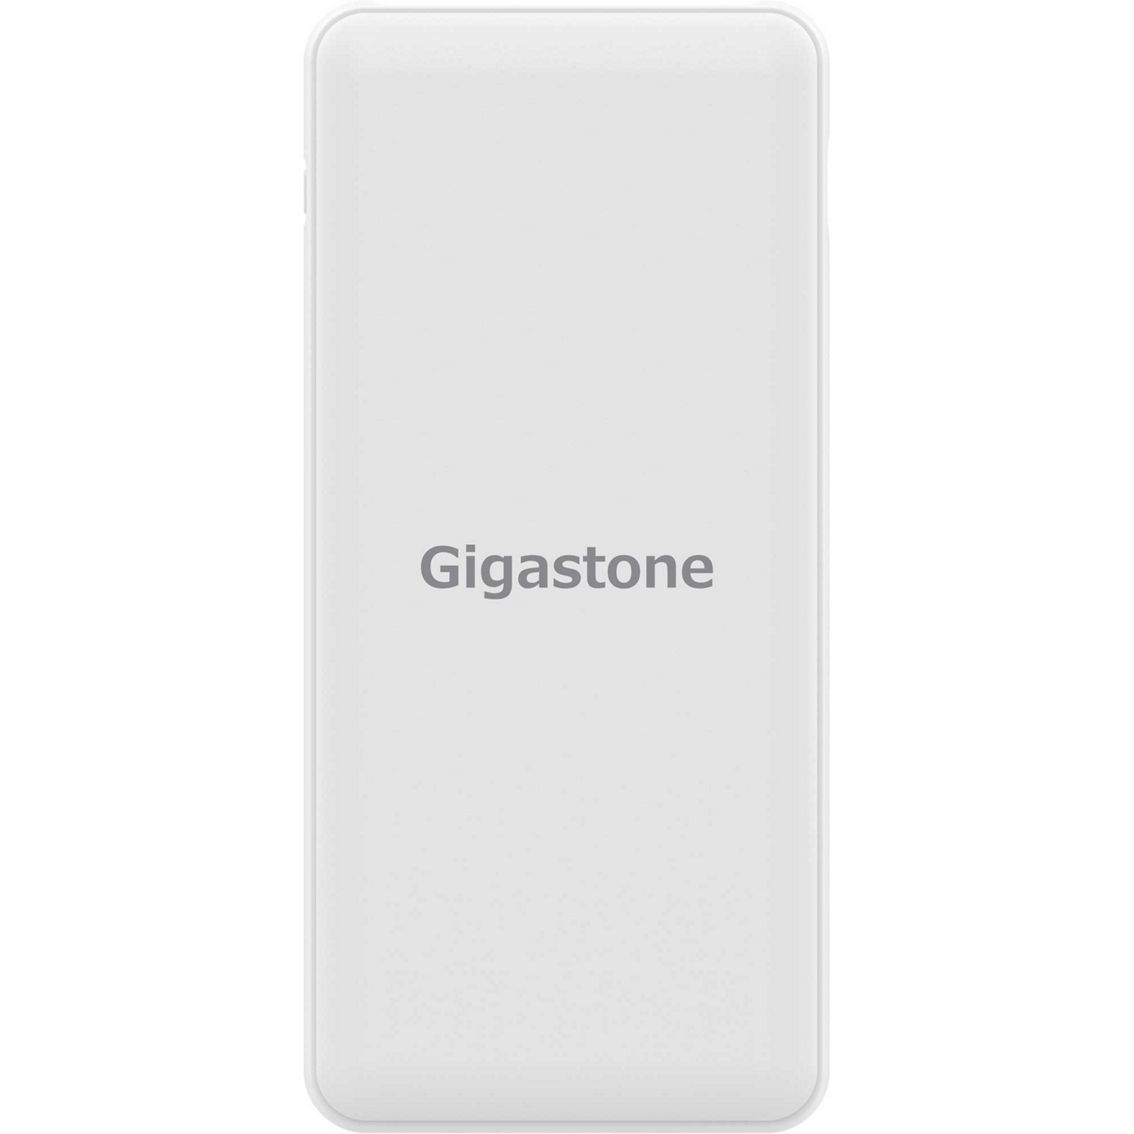 Gigastone 24,000 MAH Mobile Device Rapid Charger - Image 3 of 3